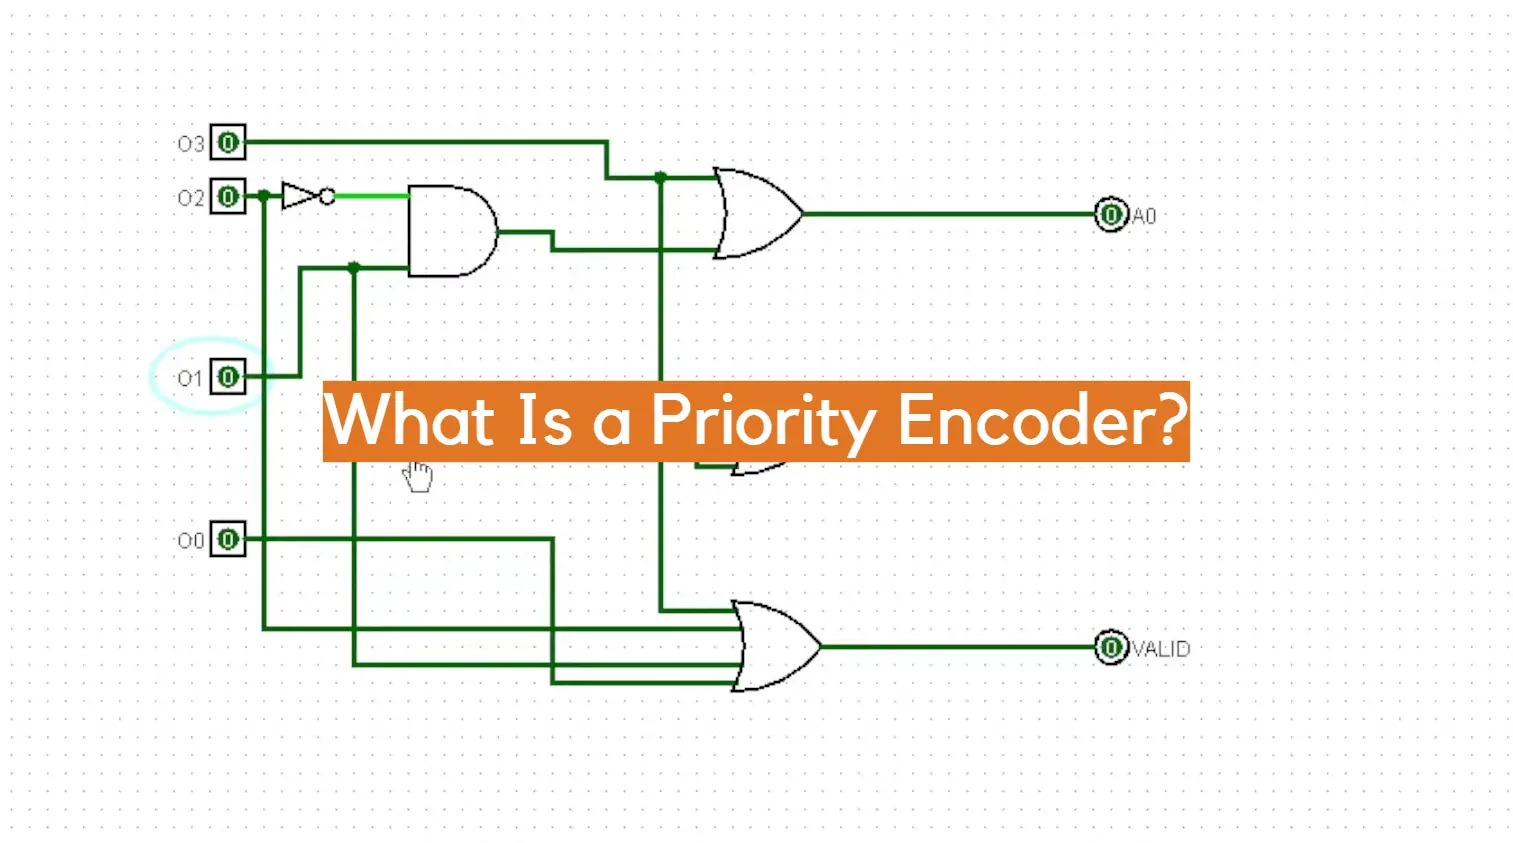 What Is a Priority Encoder?